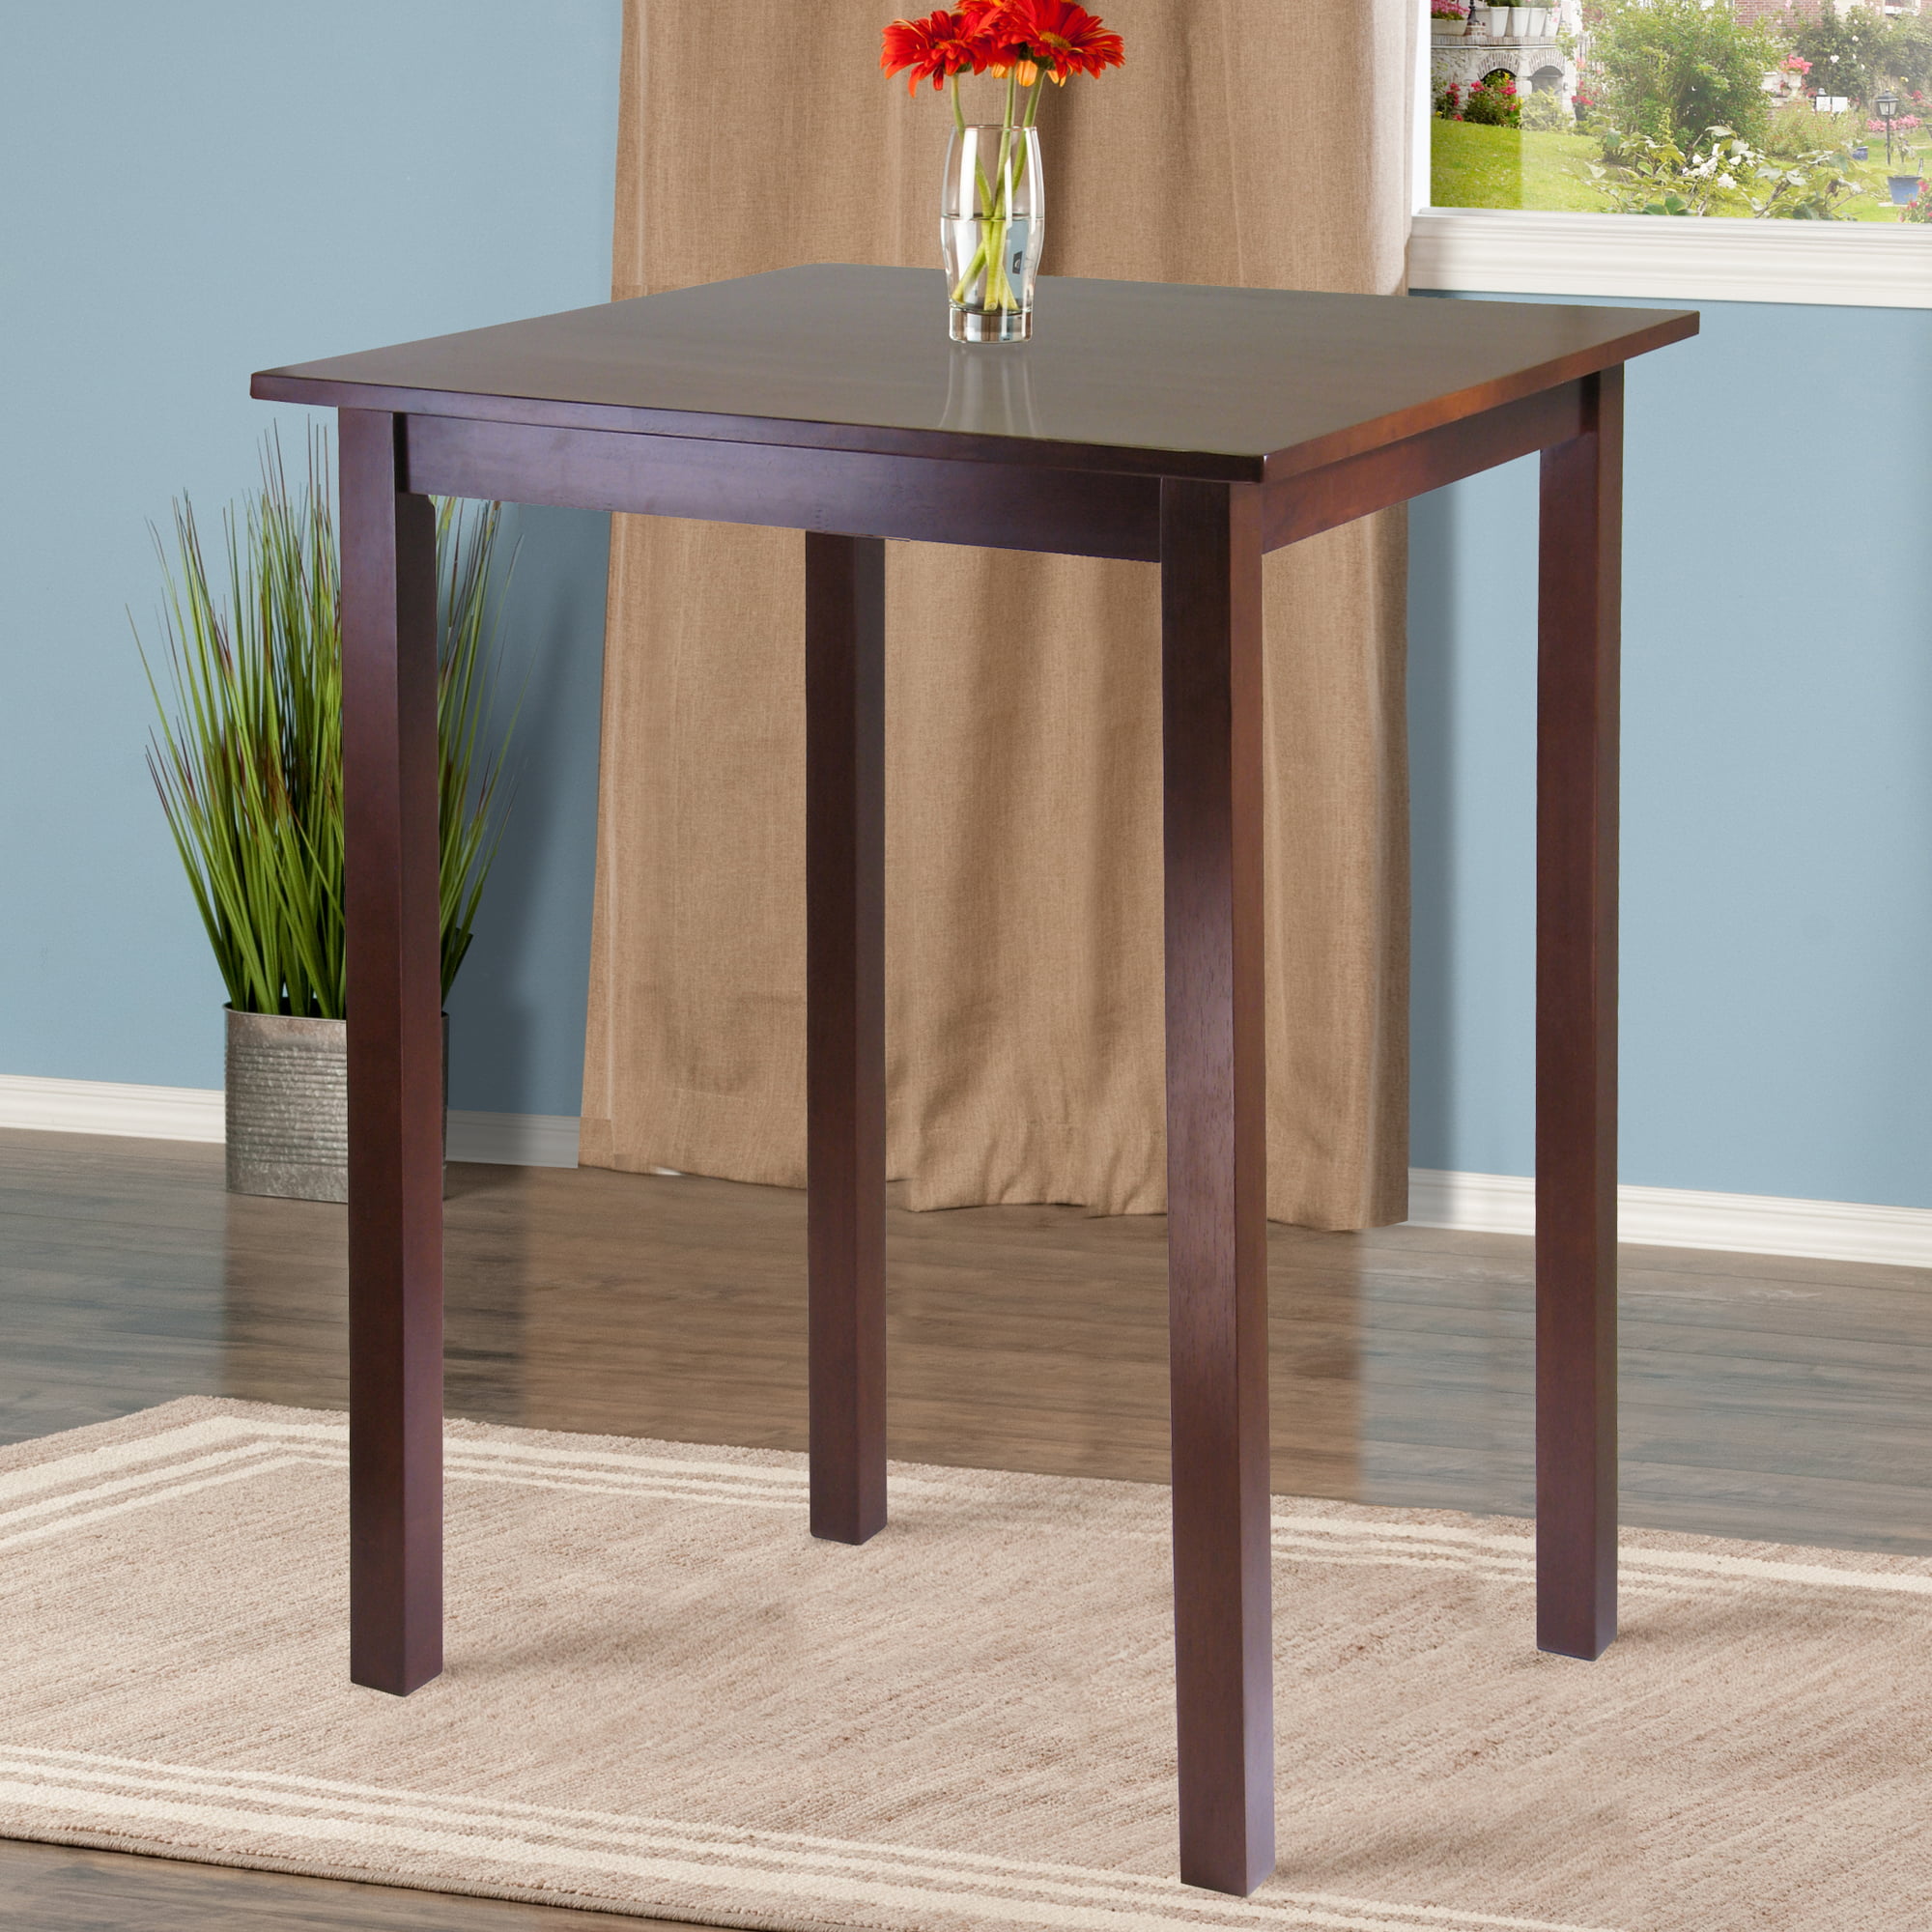 Winsome Wood Parkland Square High Table, Walnut Finish - image 2 of 5